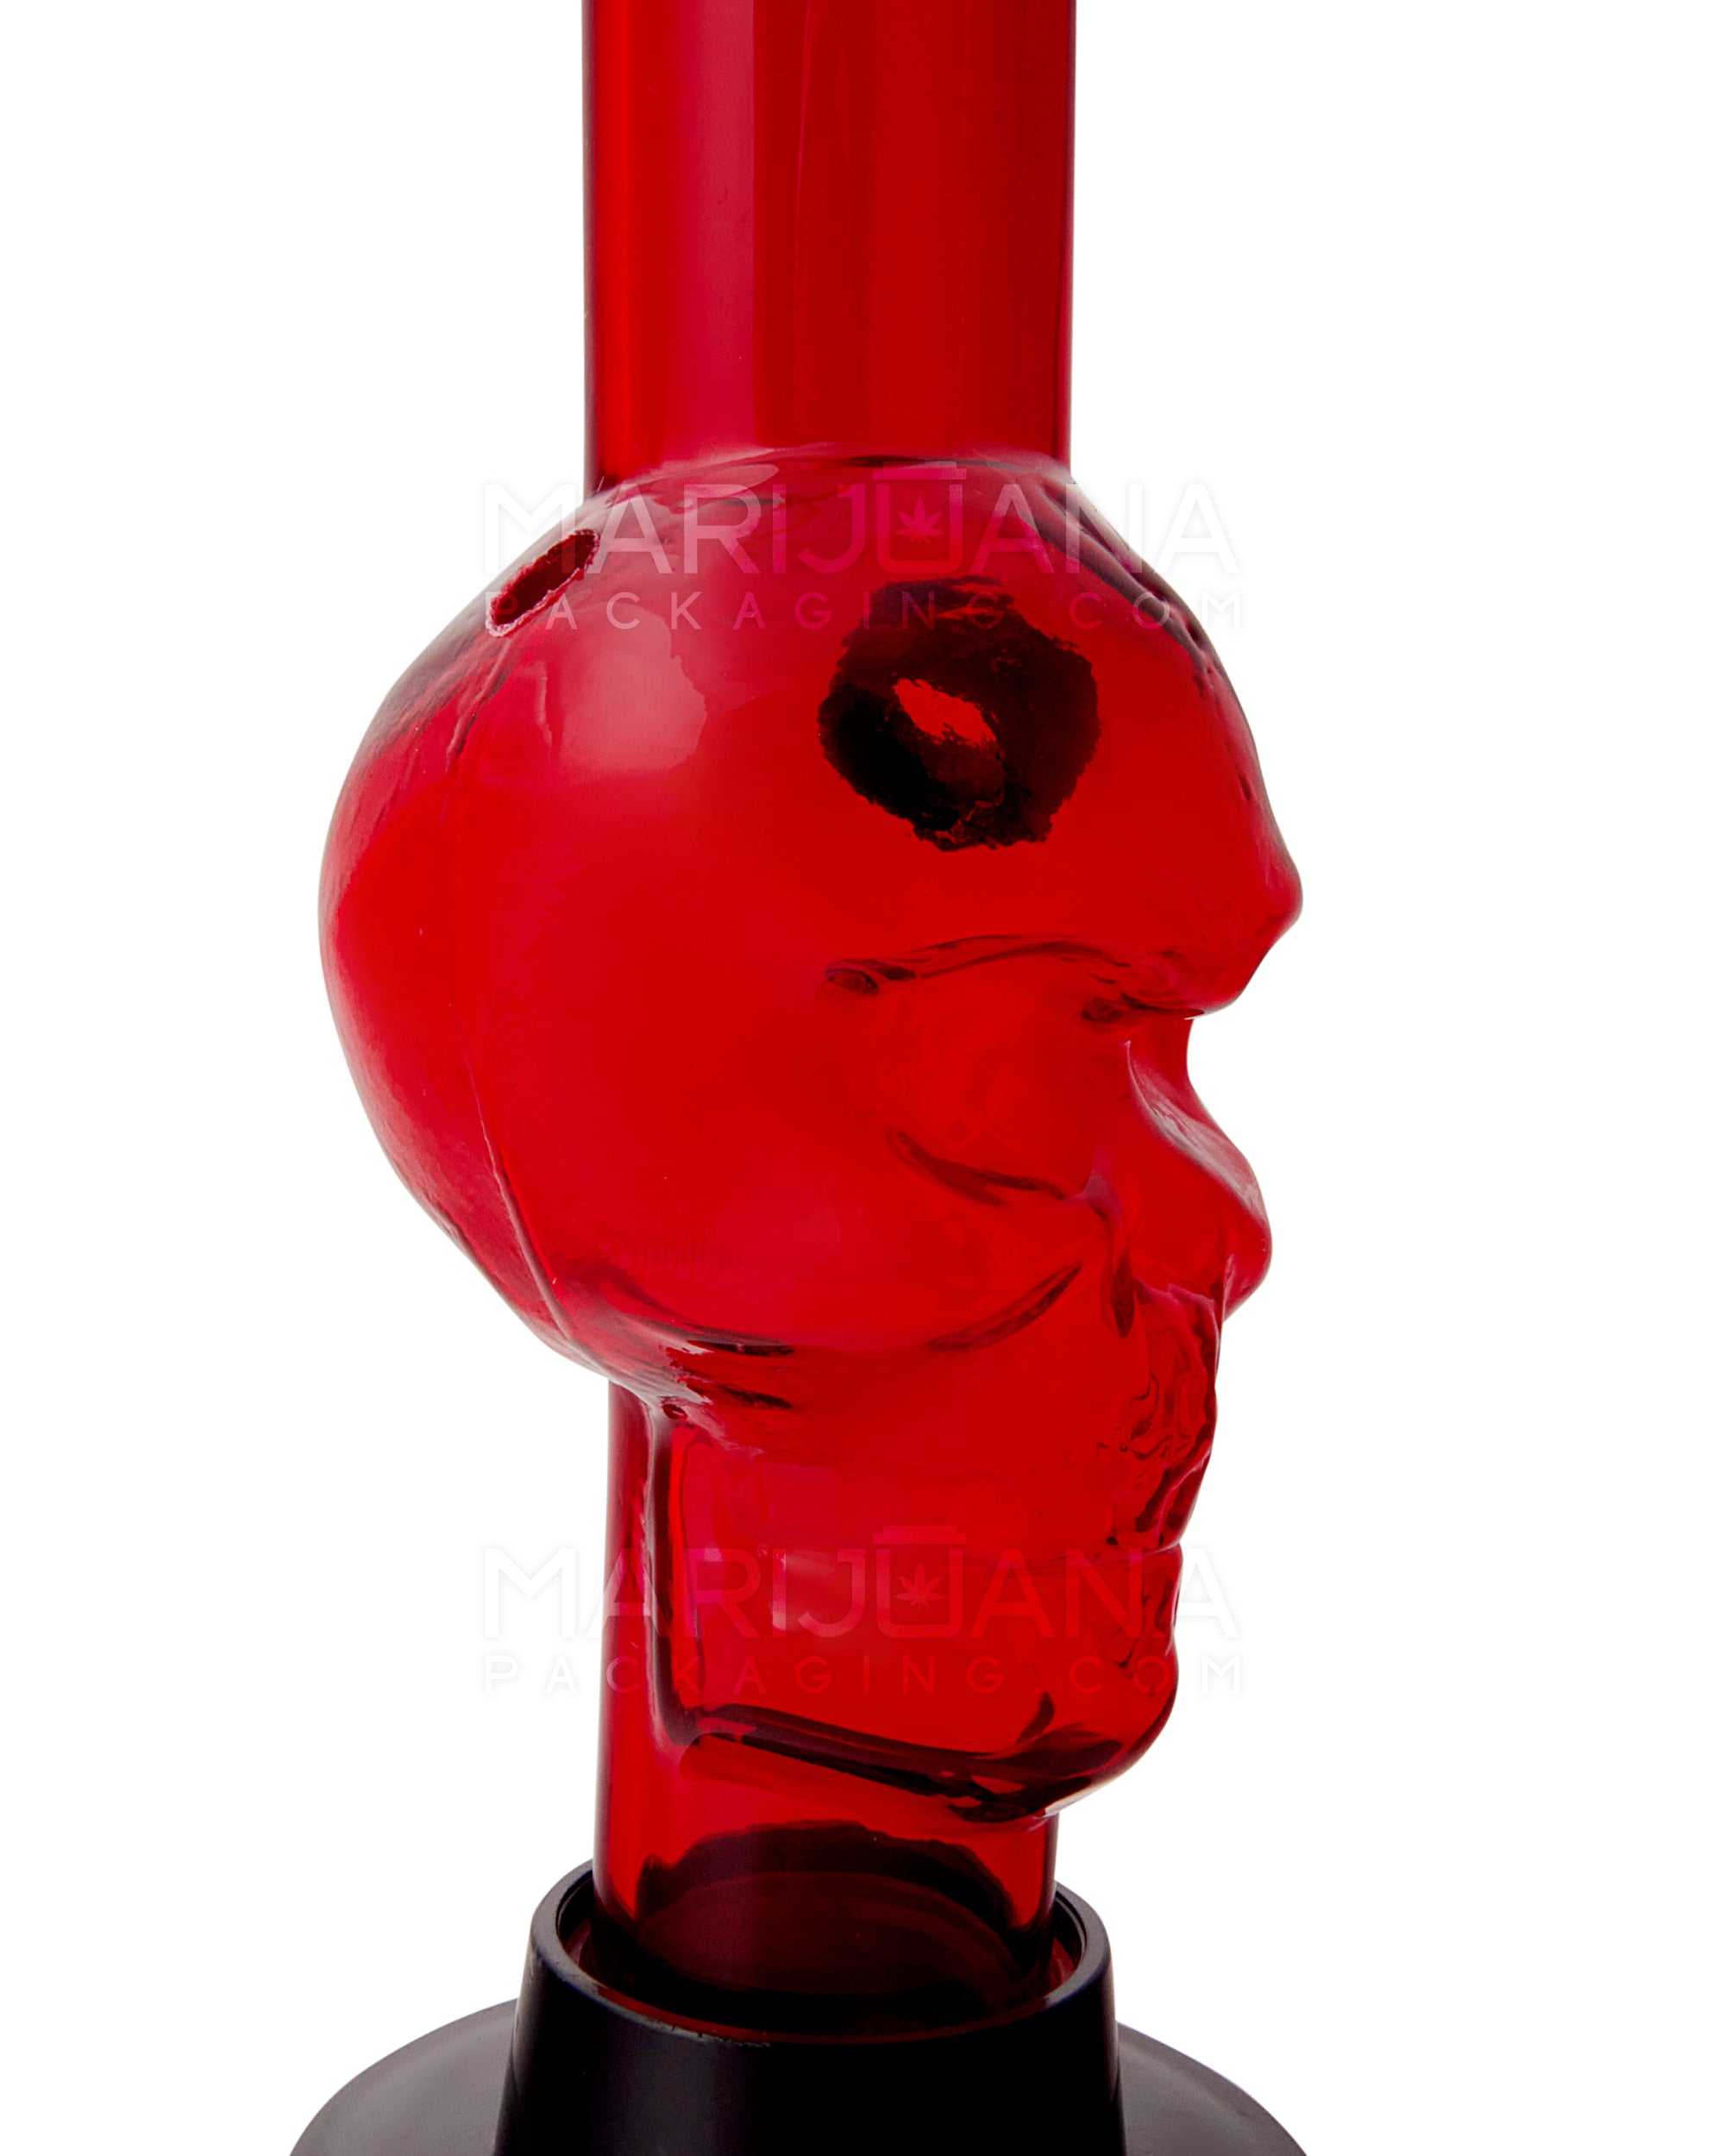 Straight Neck Acrylic Skull Water Pipe | 8in Tall - Grommet Bowl - Assorted